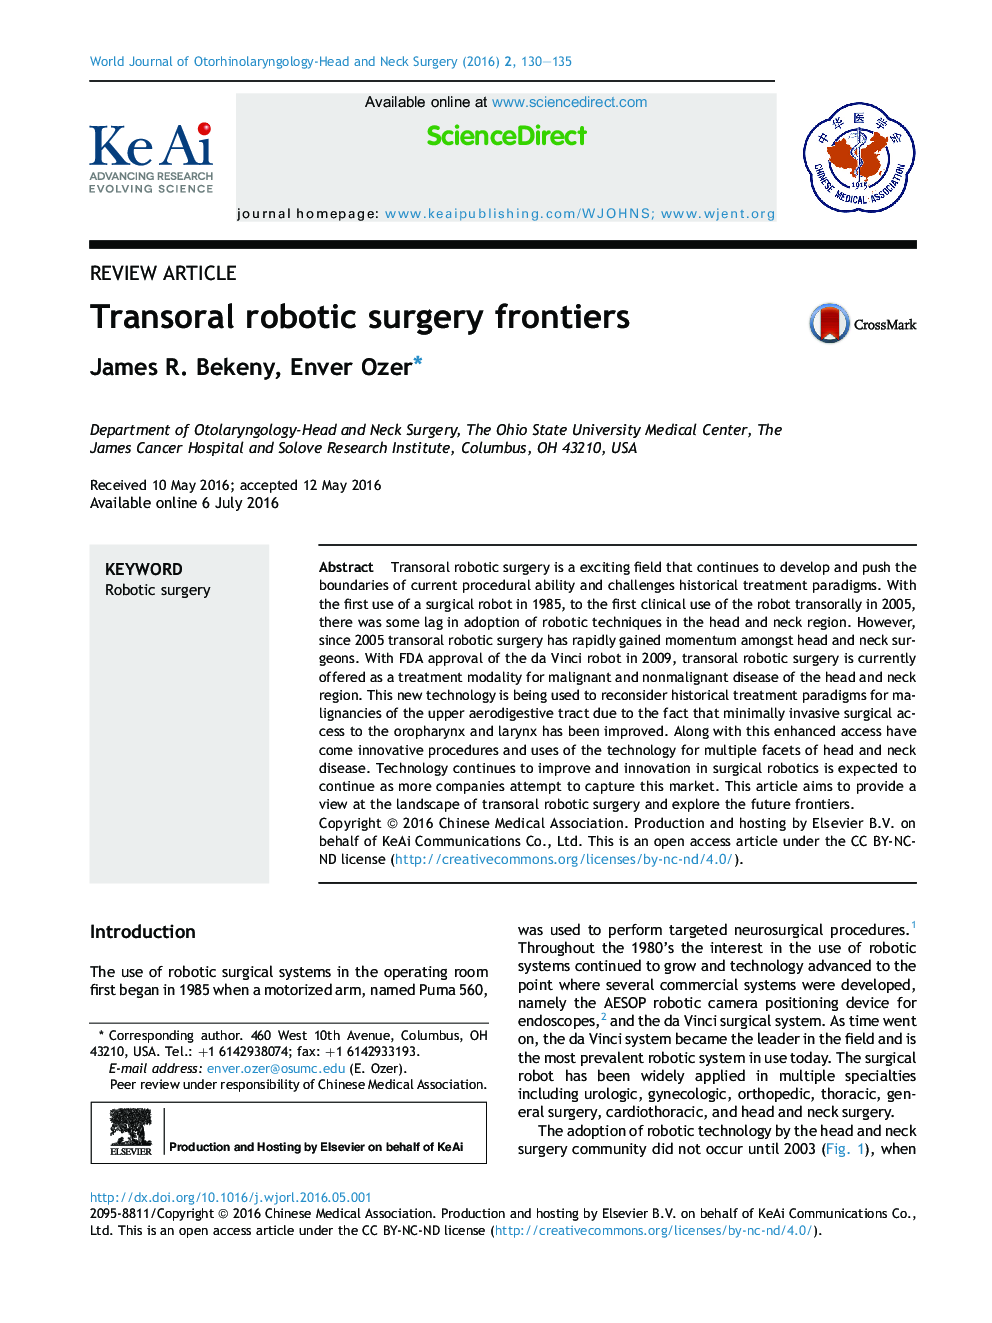 Transoral robotic surgery frontiers 